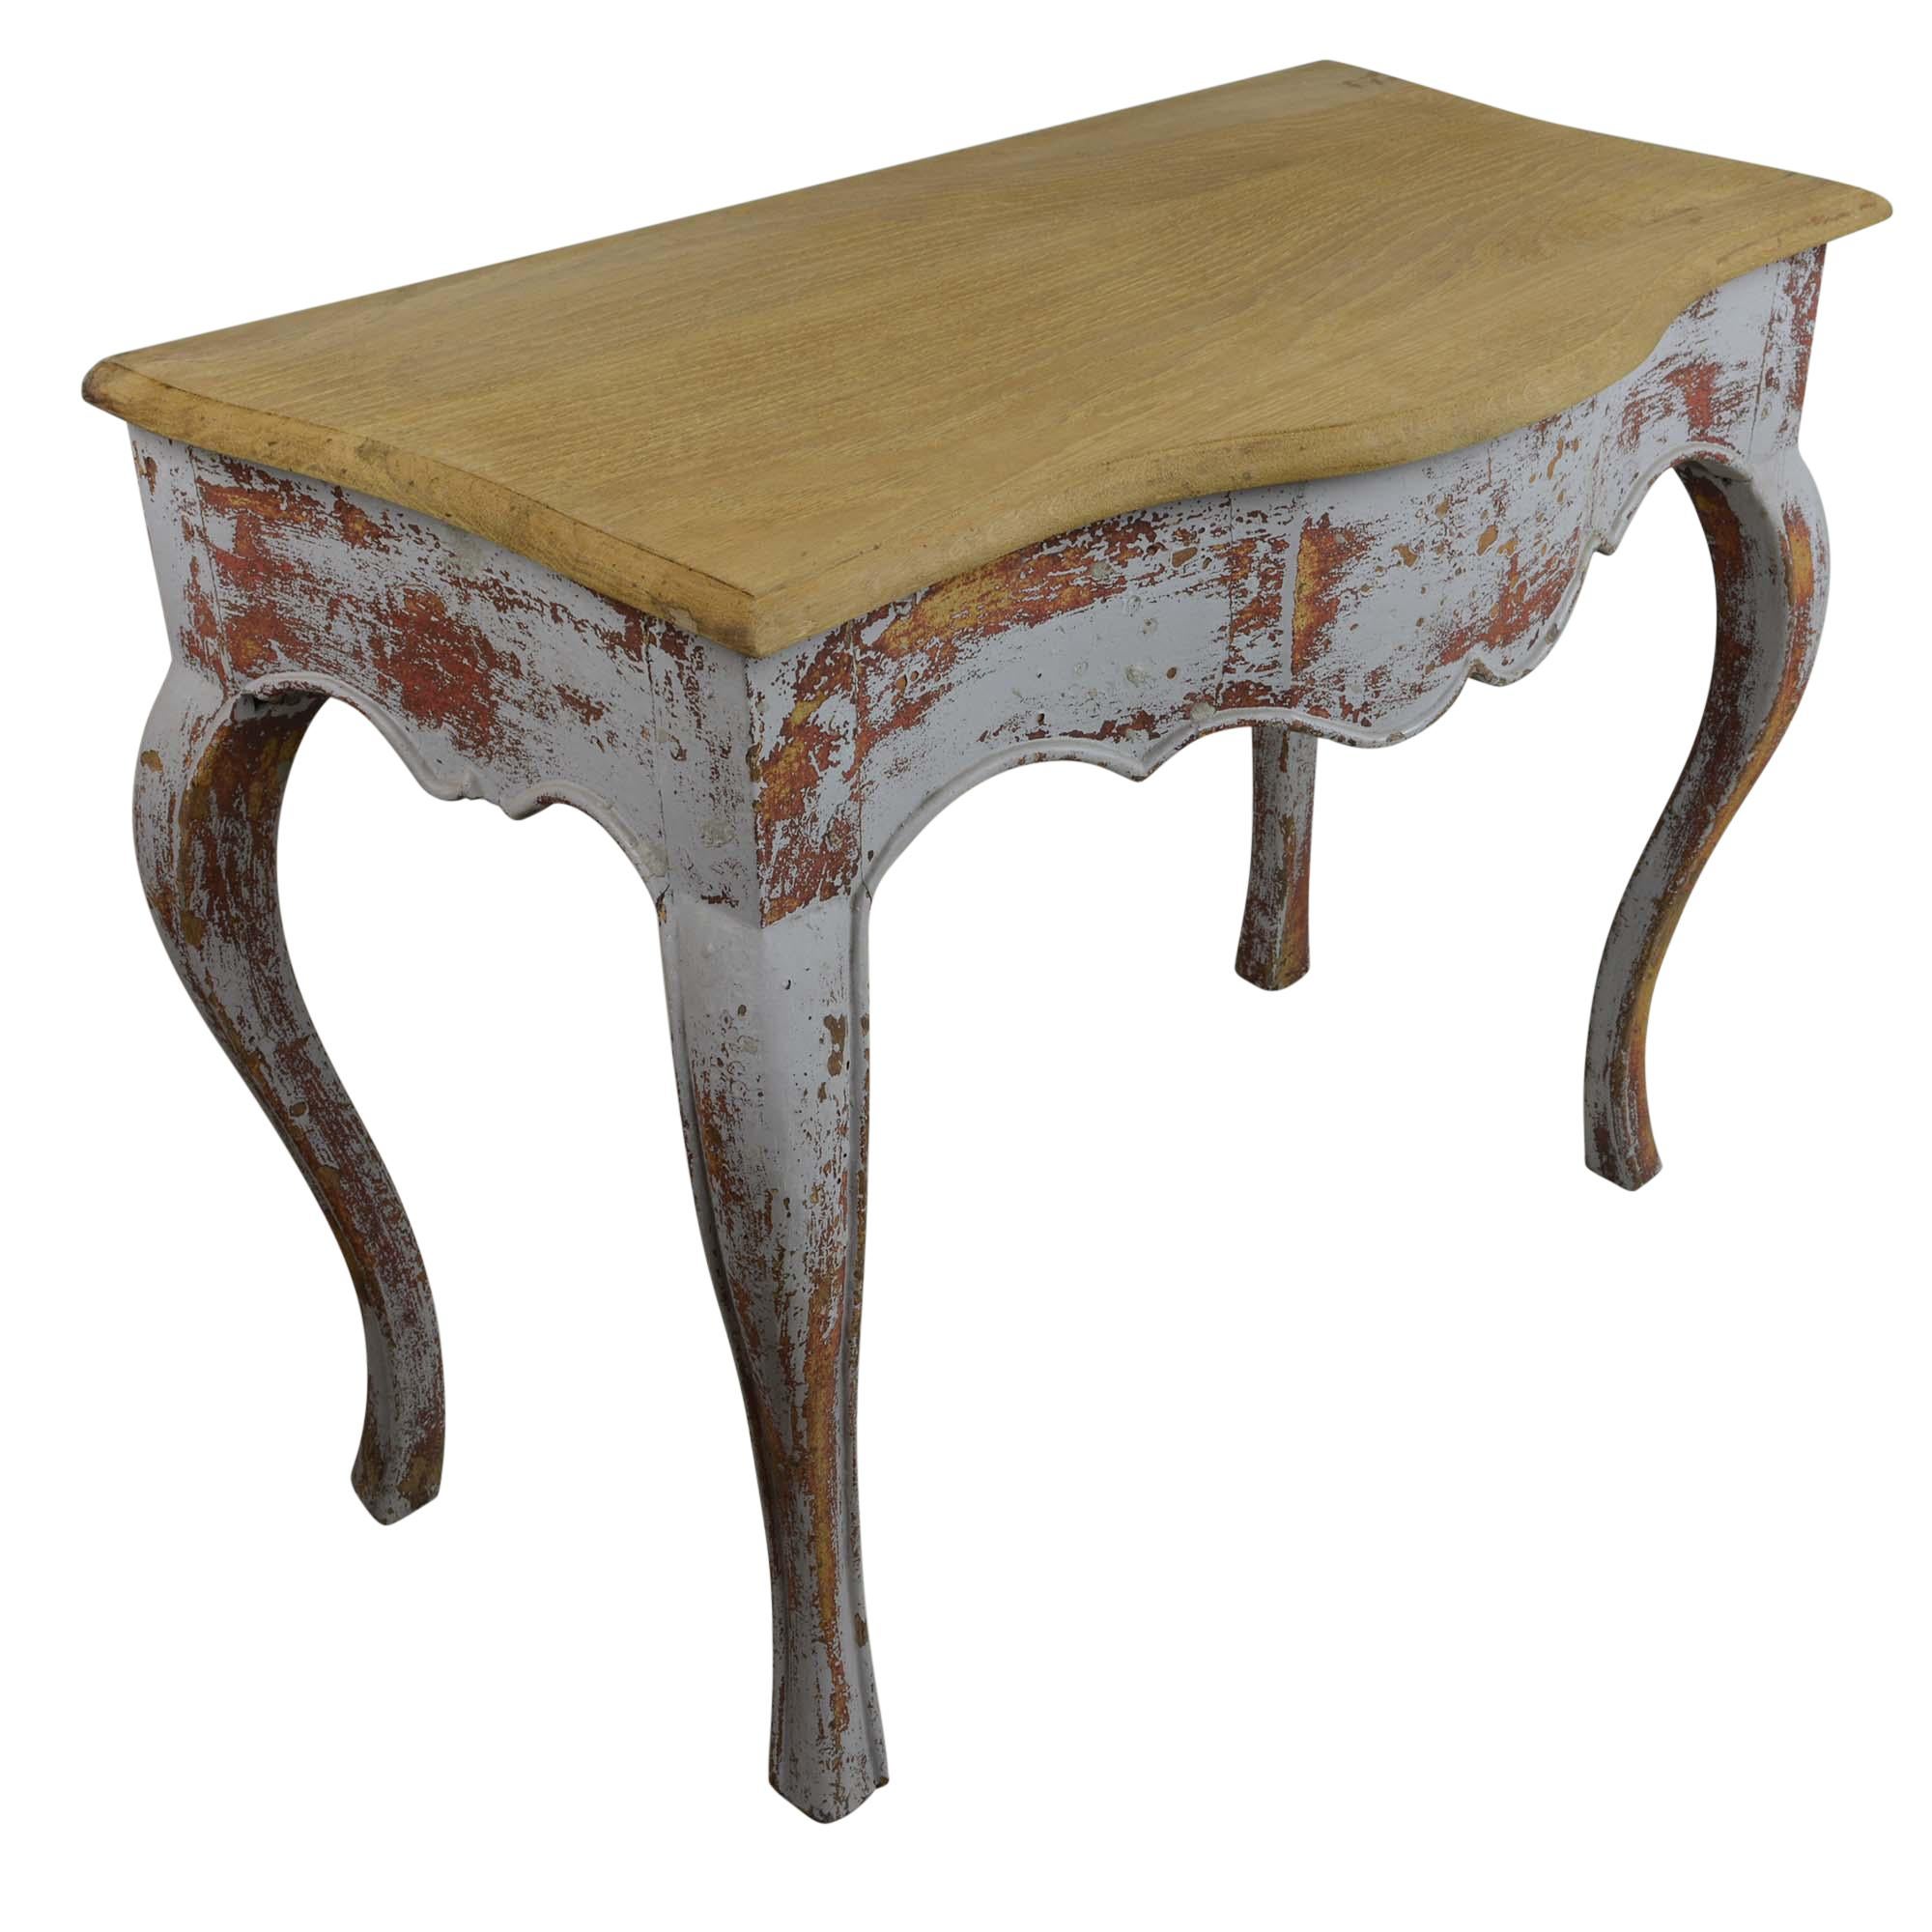 The base of the table is early 18th century and features a scalloped front apron and slender curved cabriole legs, the antique console table is painted gray with an undercoat of red paint showing through in places. In some areas the paint is